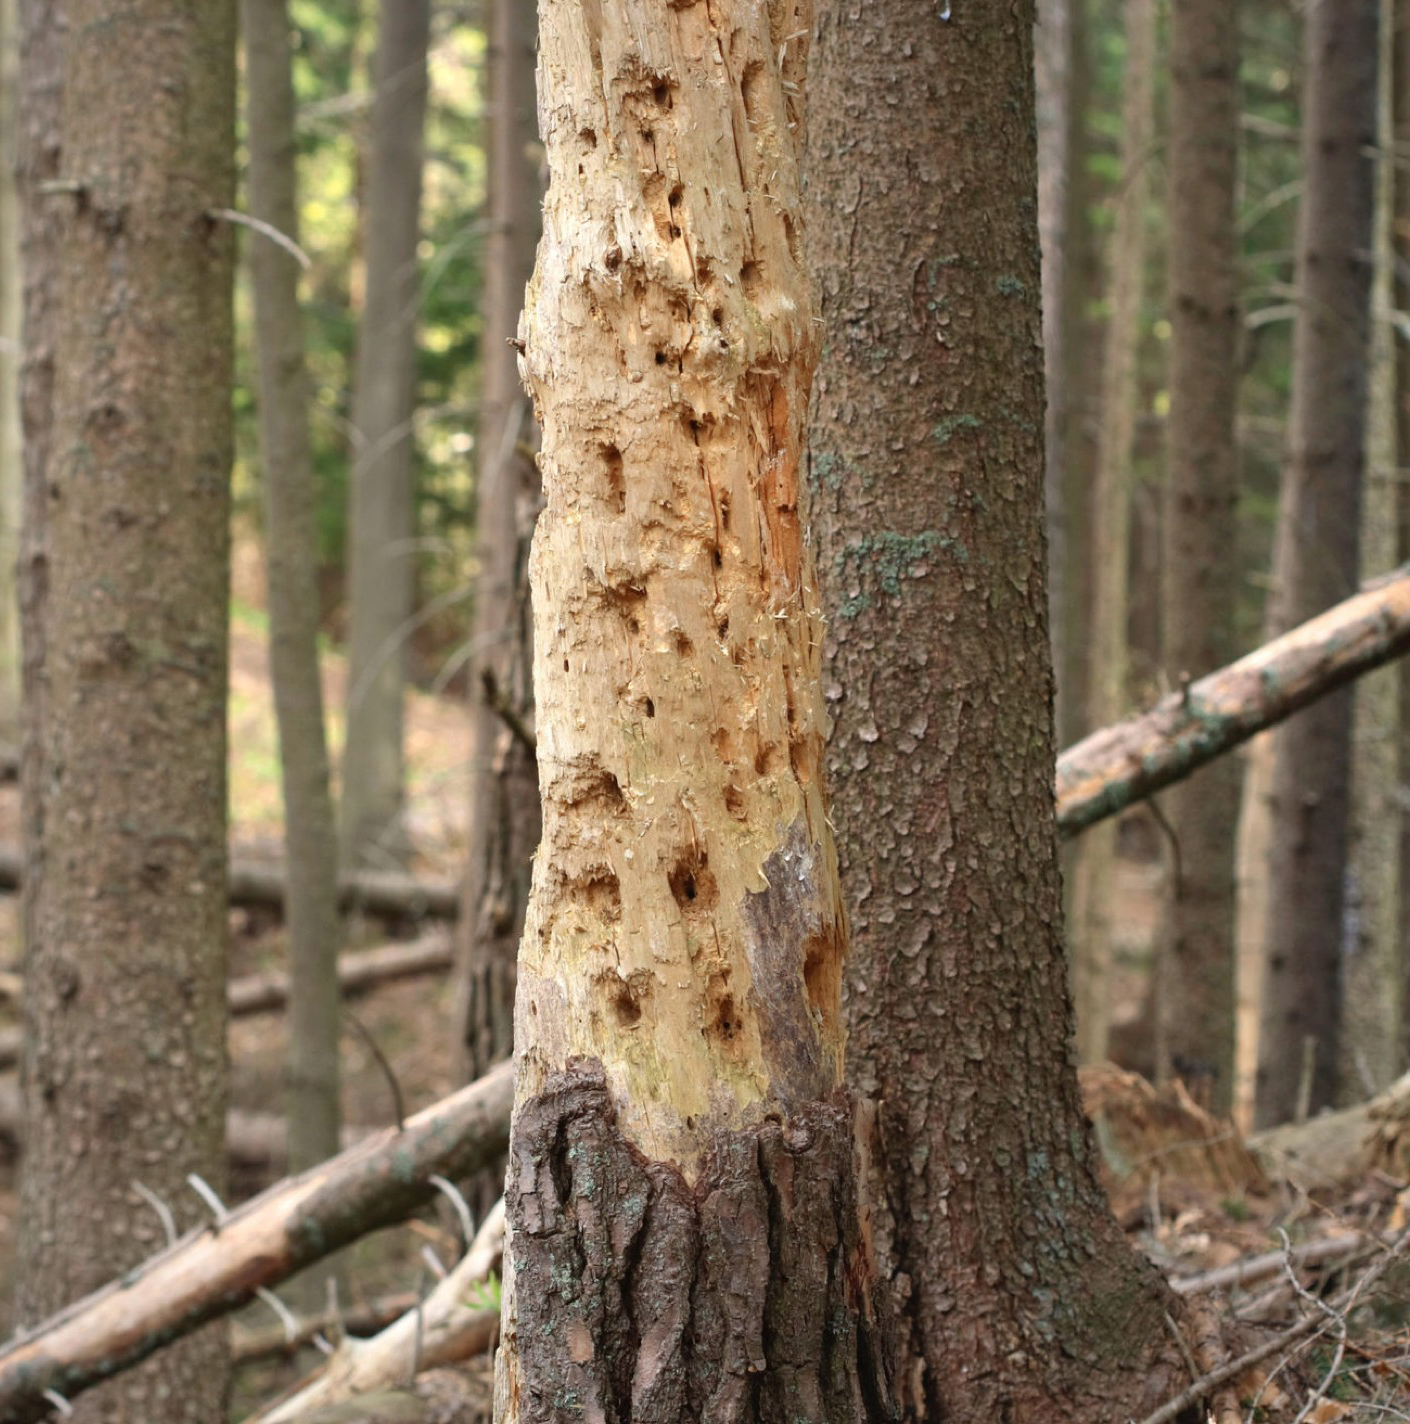 Townsend Arborcare tree specialists can spot insect and tree diseases early to provide solutions for your property.